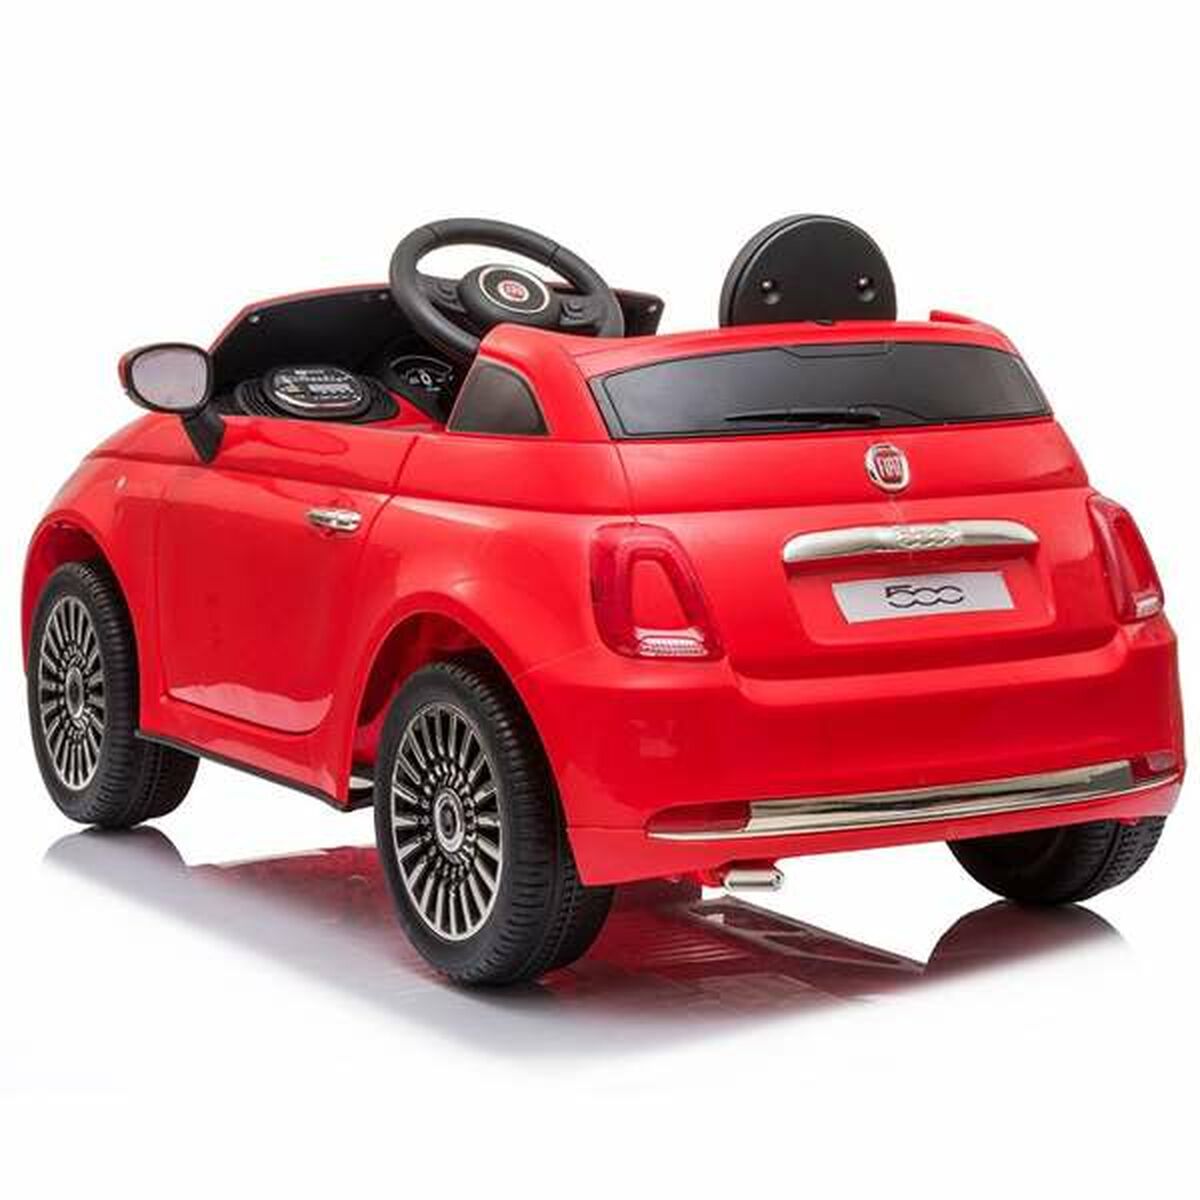 Children's Electric Car Fiat 500 113 x 67,5 x 53 cm MP3 Red 30 W 6 V With remote control